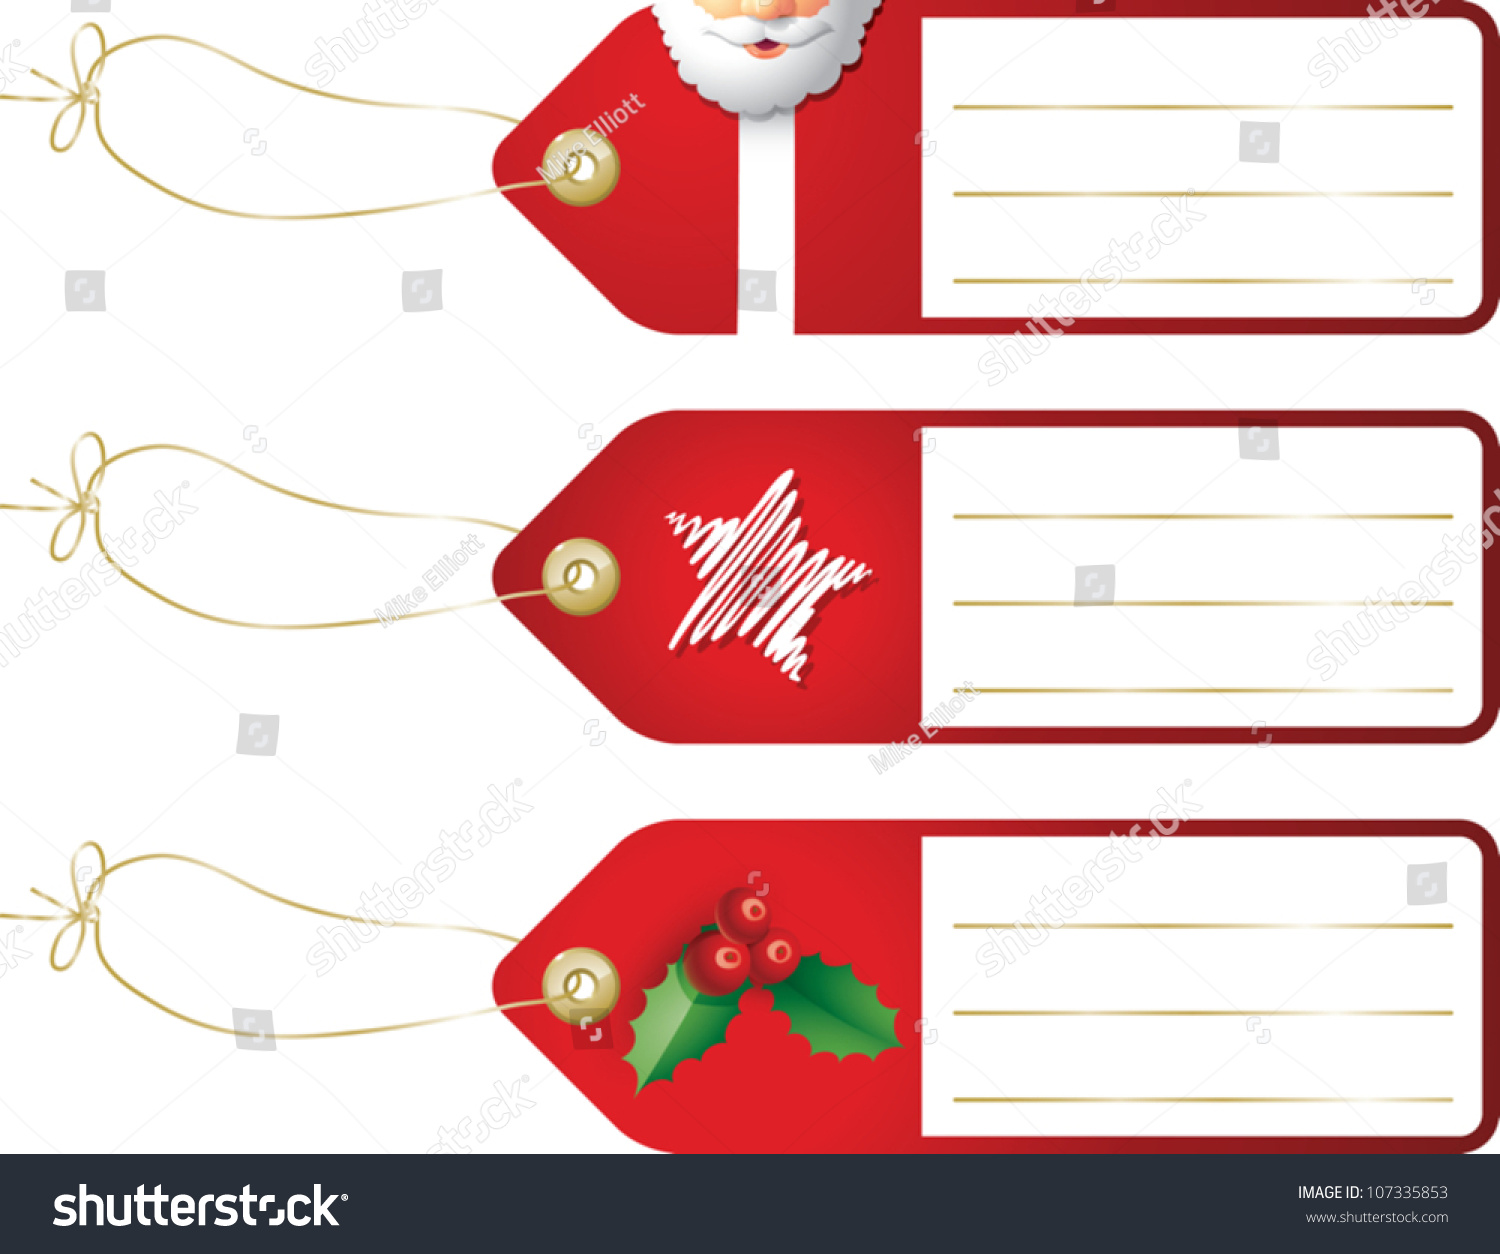 christmas gift tags clipart - photo #23